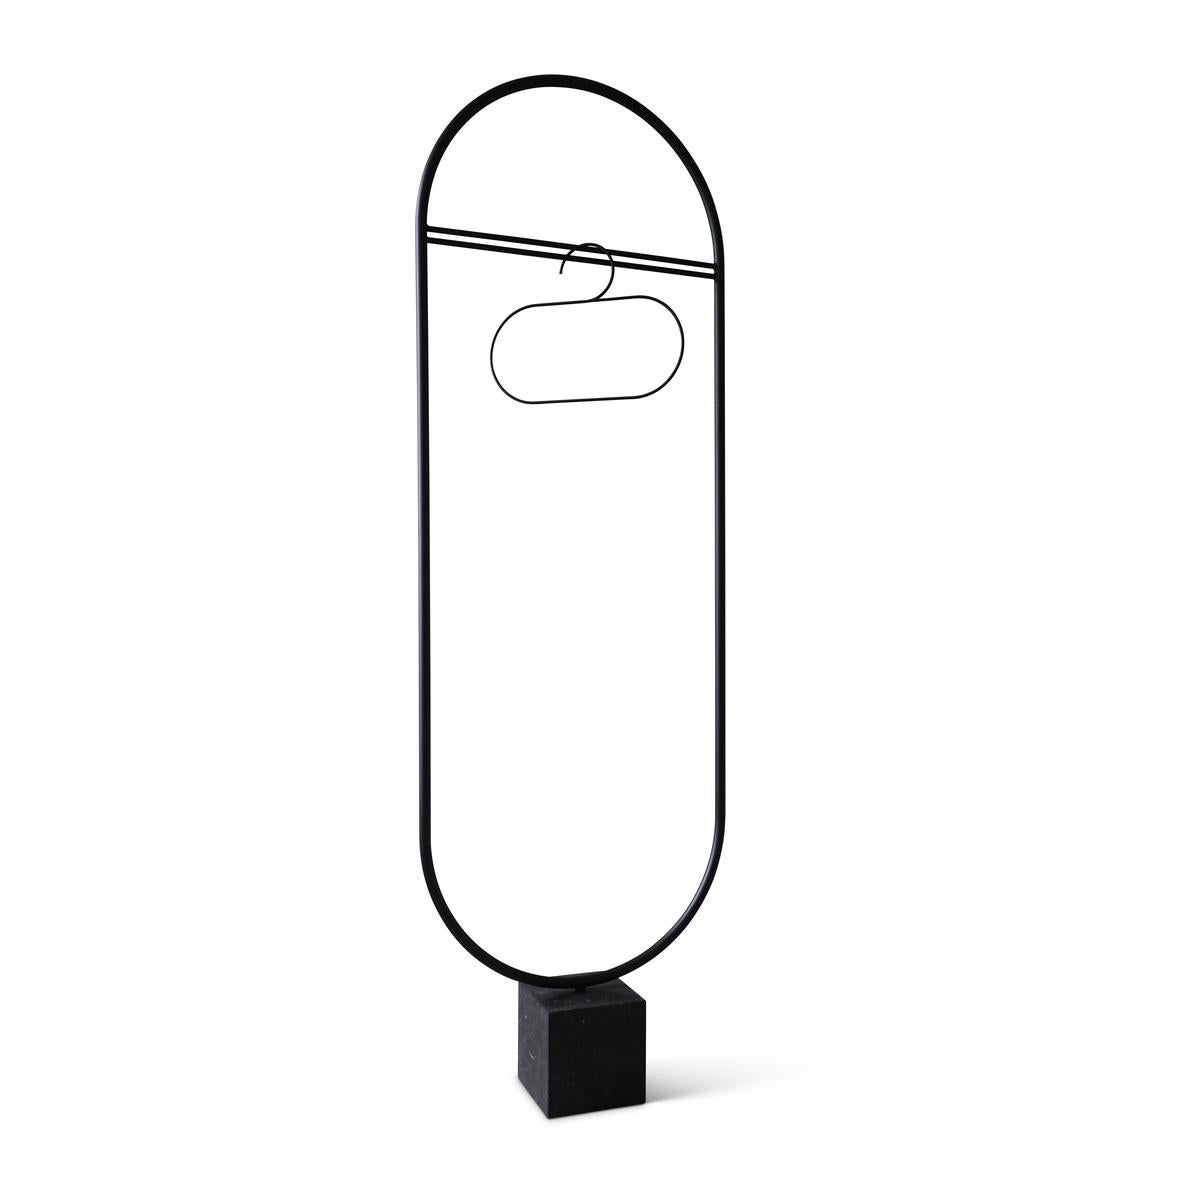 Stand out - Coat stand
Design: Friends & Founders

Powder-coated steel, and marble square base.

  


Contemporary design studio Friends & Founders was founded in 2003 by Ida Linea and Rasmus Hilderbrand in Copenhagen, Denmark.
For this